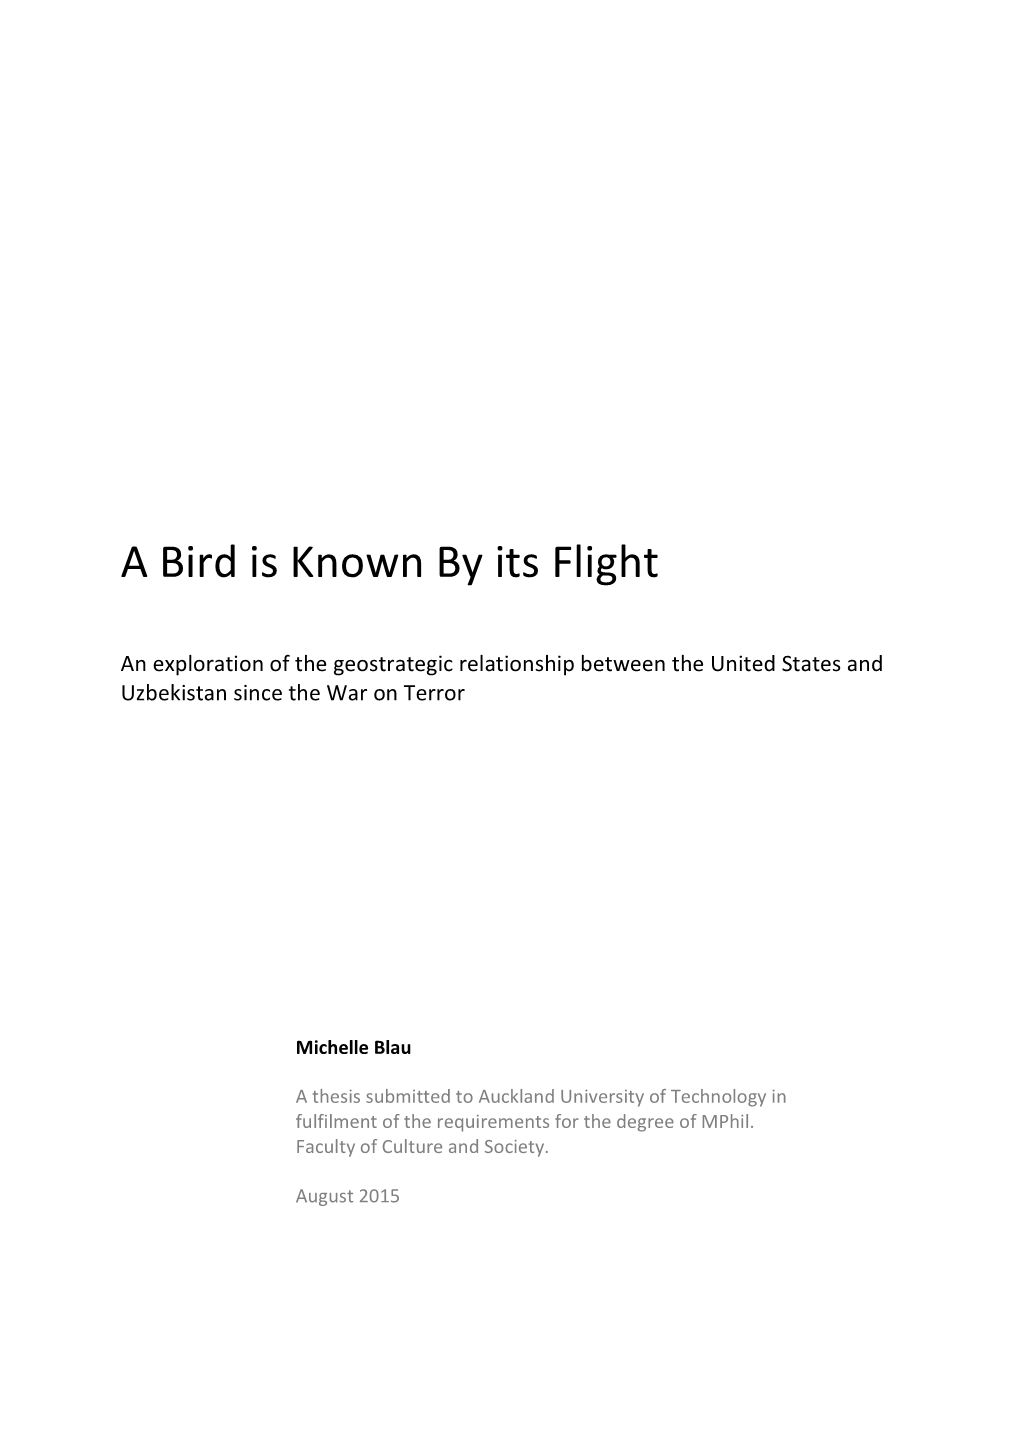 A Bird Is Known by Its Flight